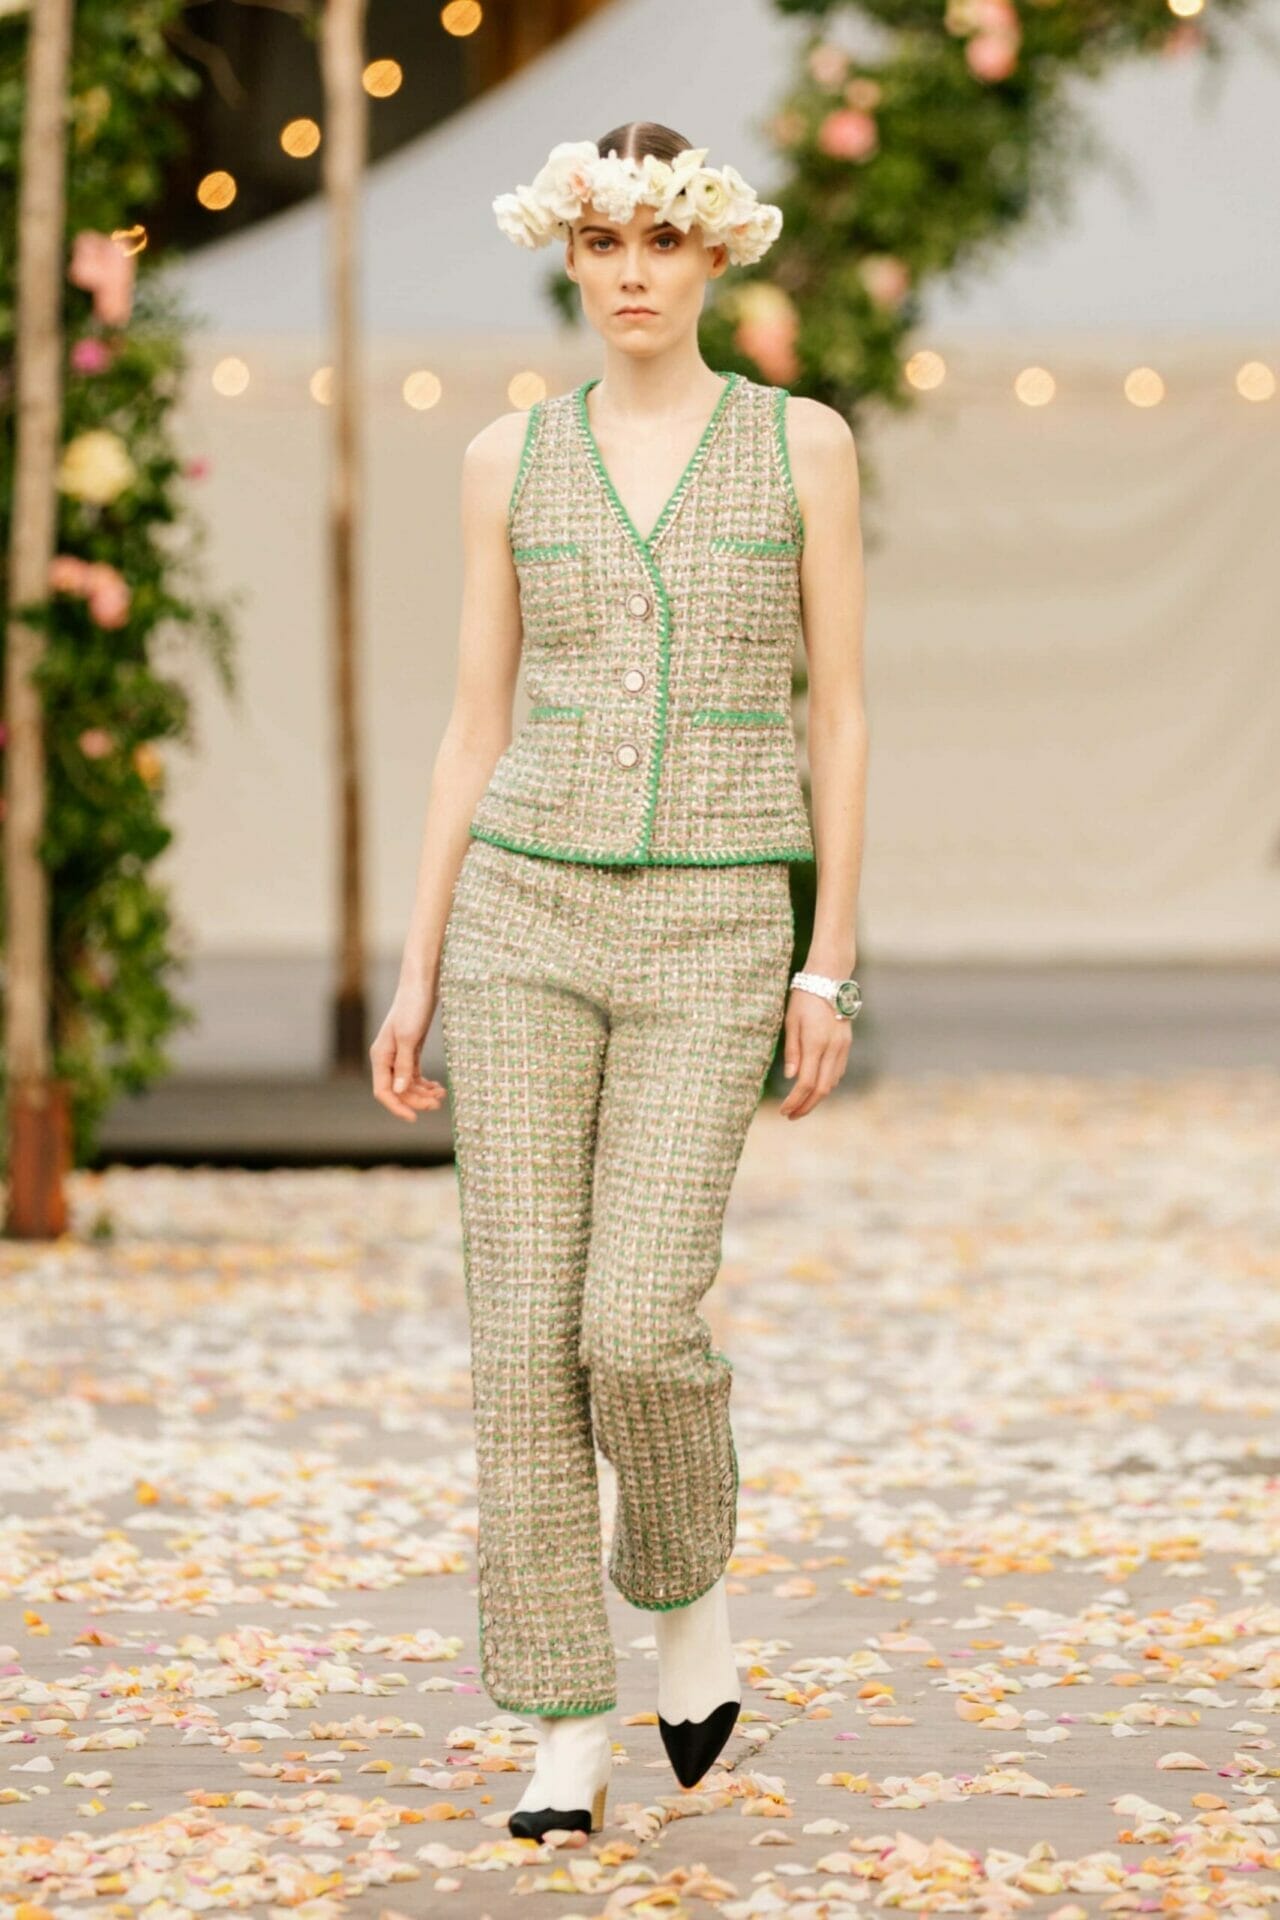 https://e3aq9pu7by6.exactdn.com/wp-content/uploads/2021/01/00008-Chanel-Couture-Spring-21-scaled.jpg?strip=all&lossy=1&ssl=1